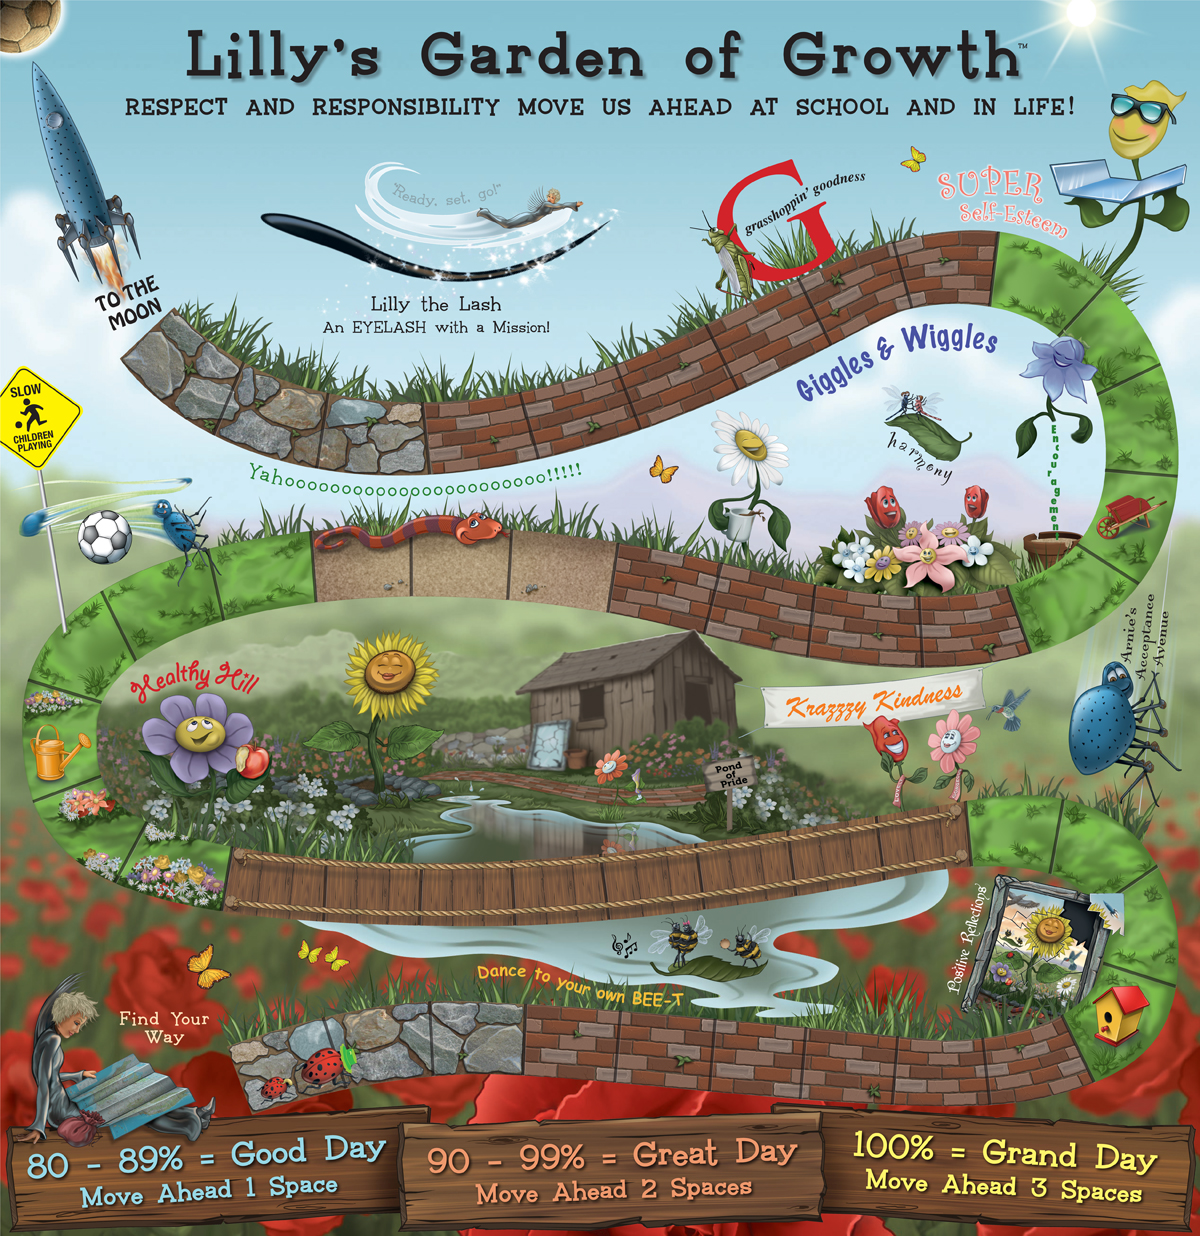 Lilly's Garden of Growth Jpeg File